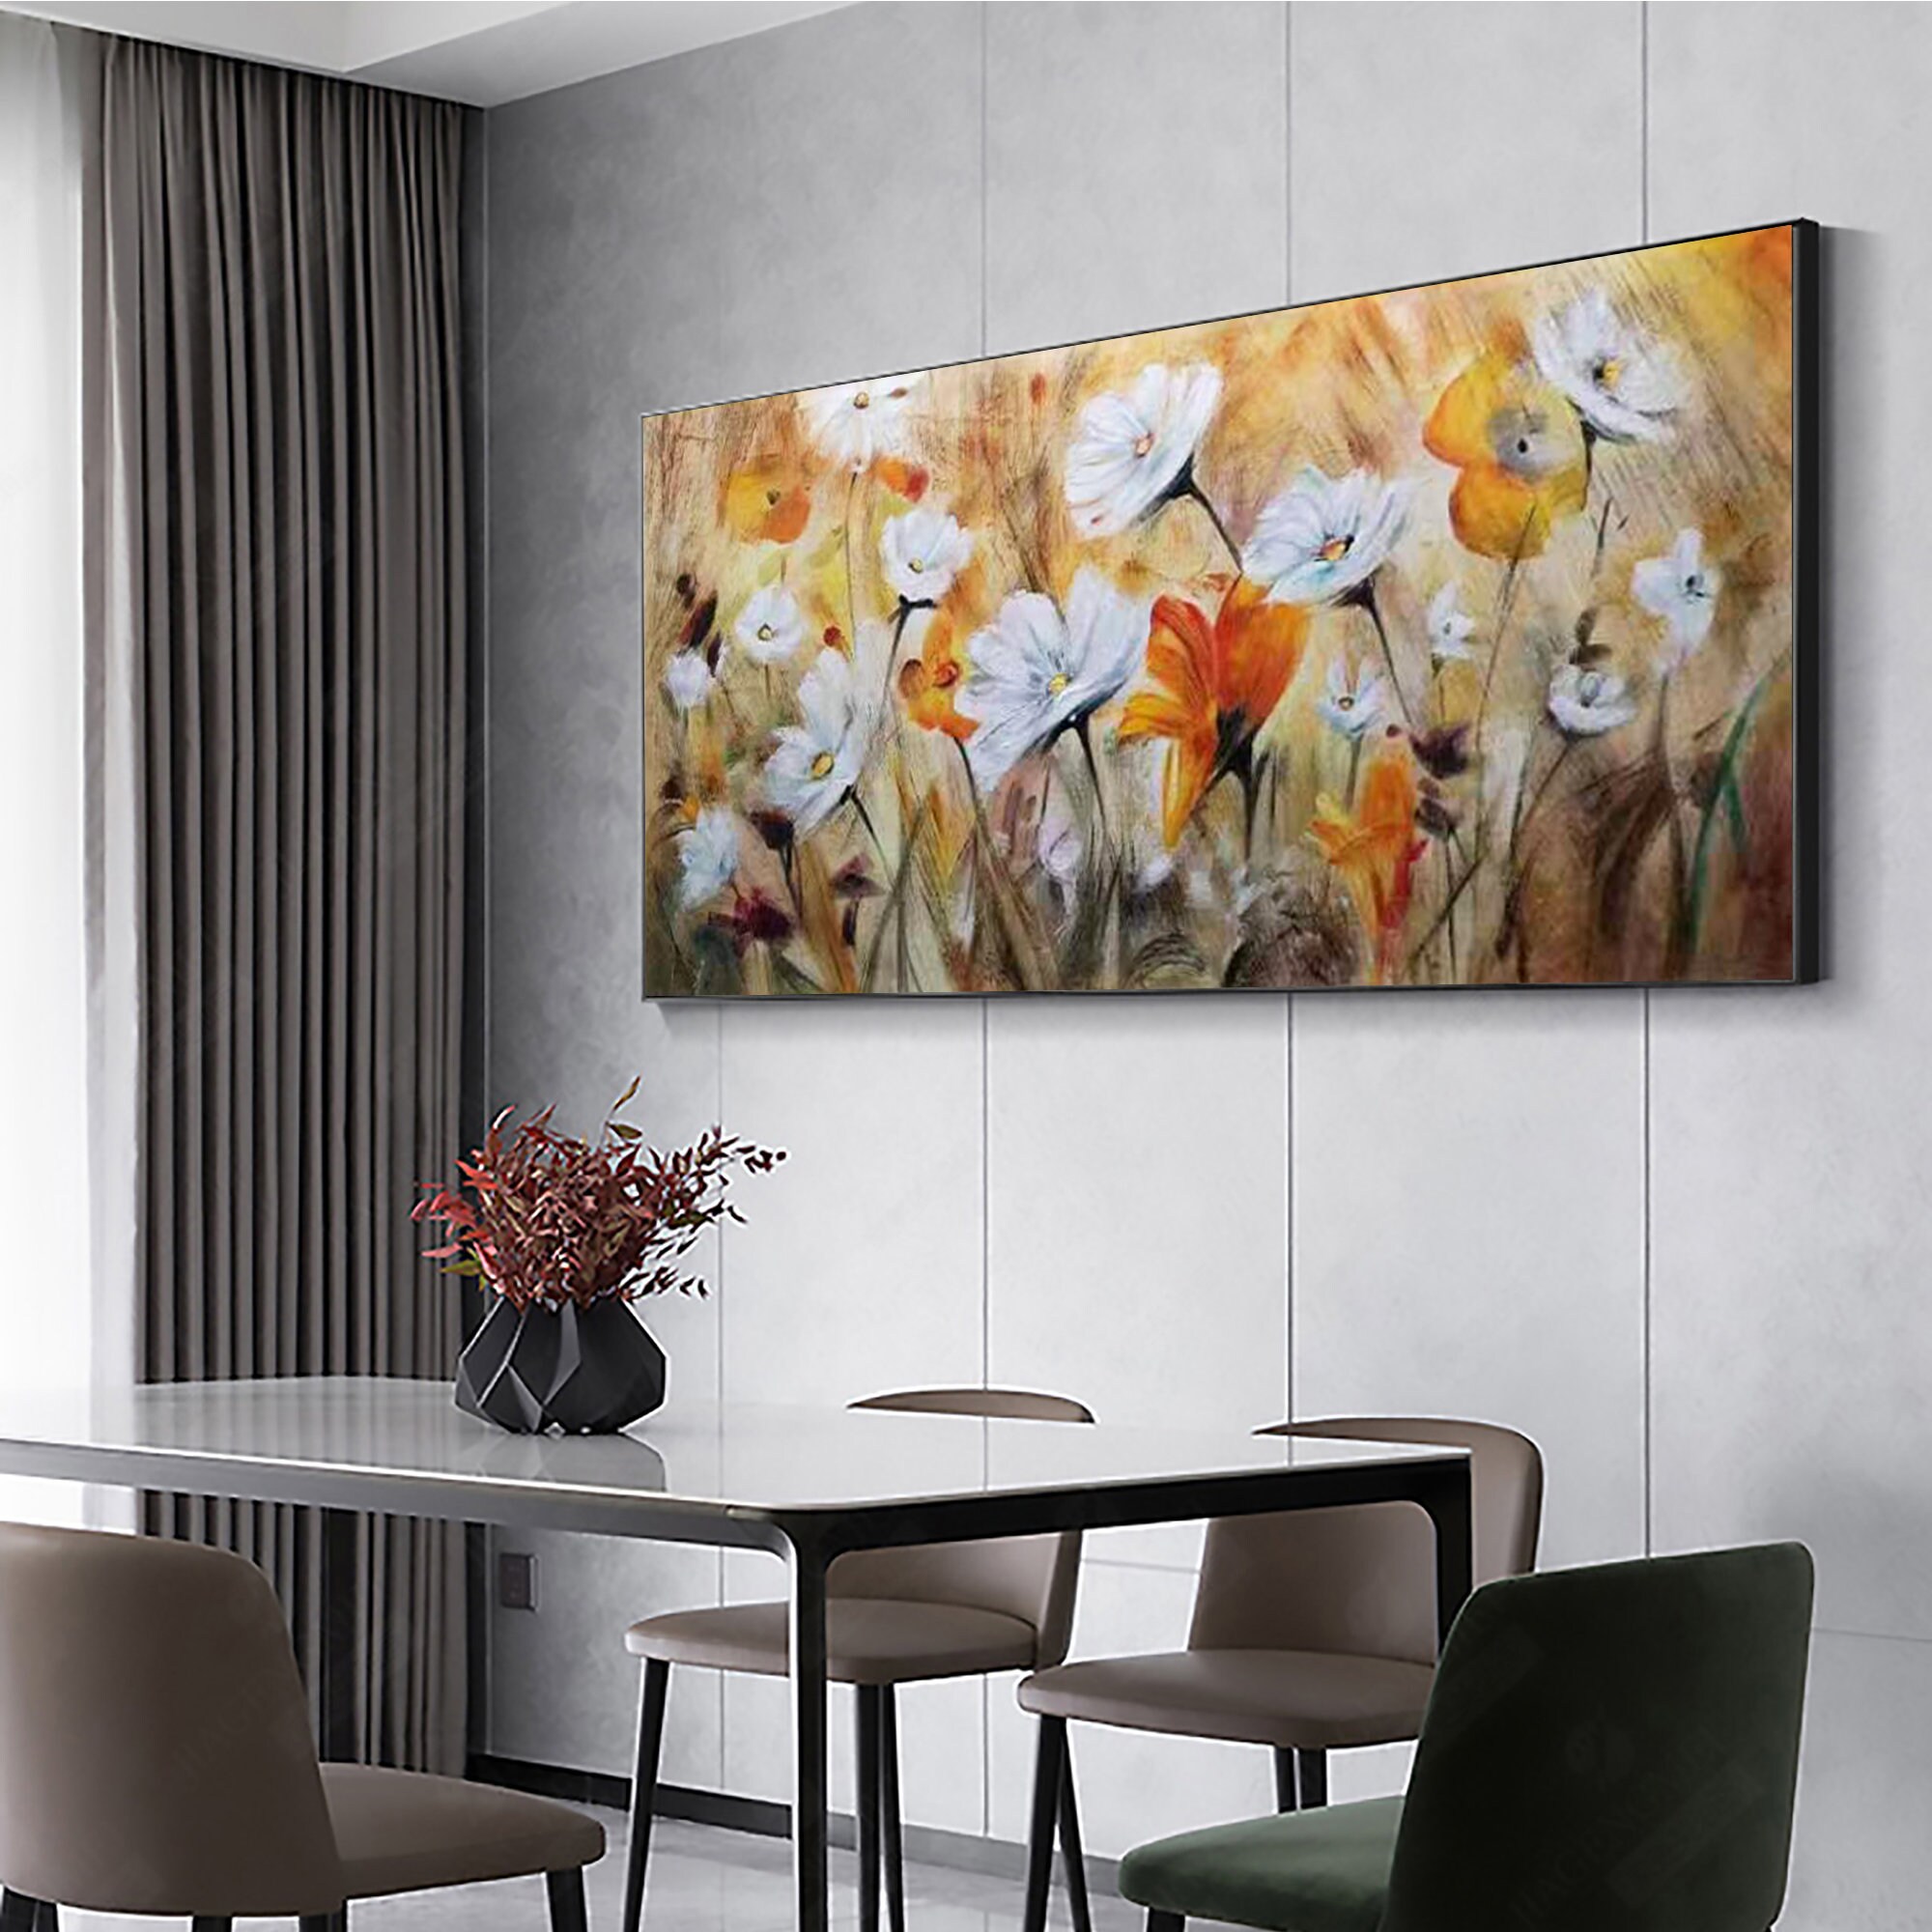 Urban landscape handmade abstract oil painting on canvas large size mural  living room home decoration original painting – Nordic Wall Decor